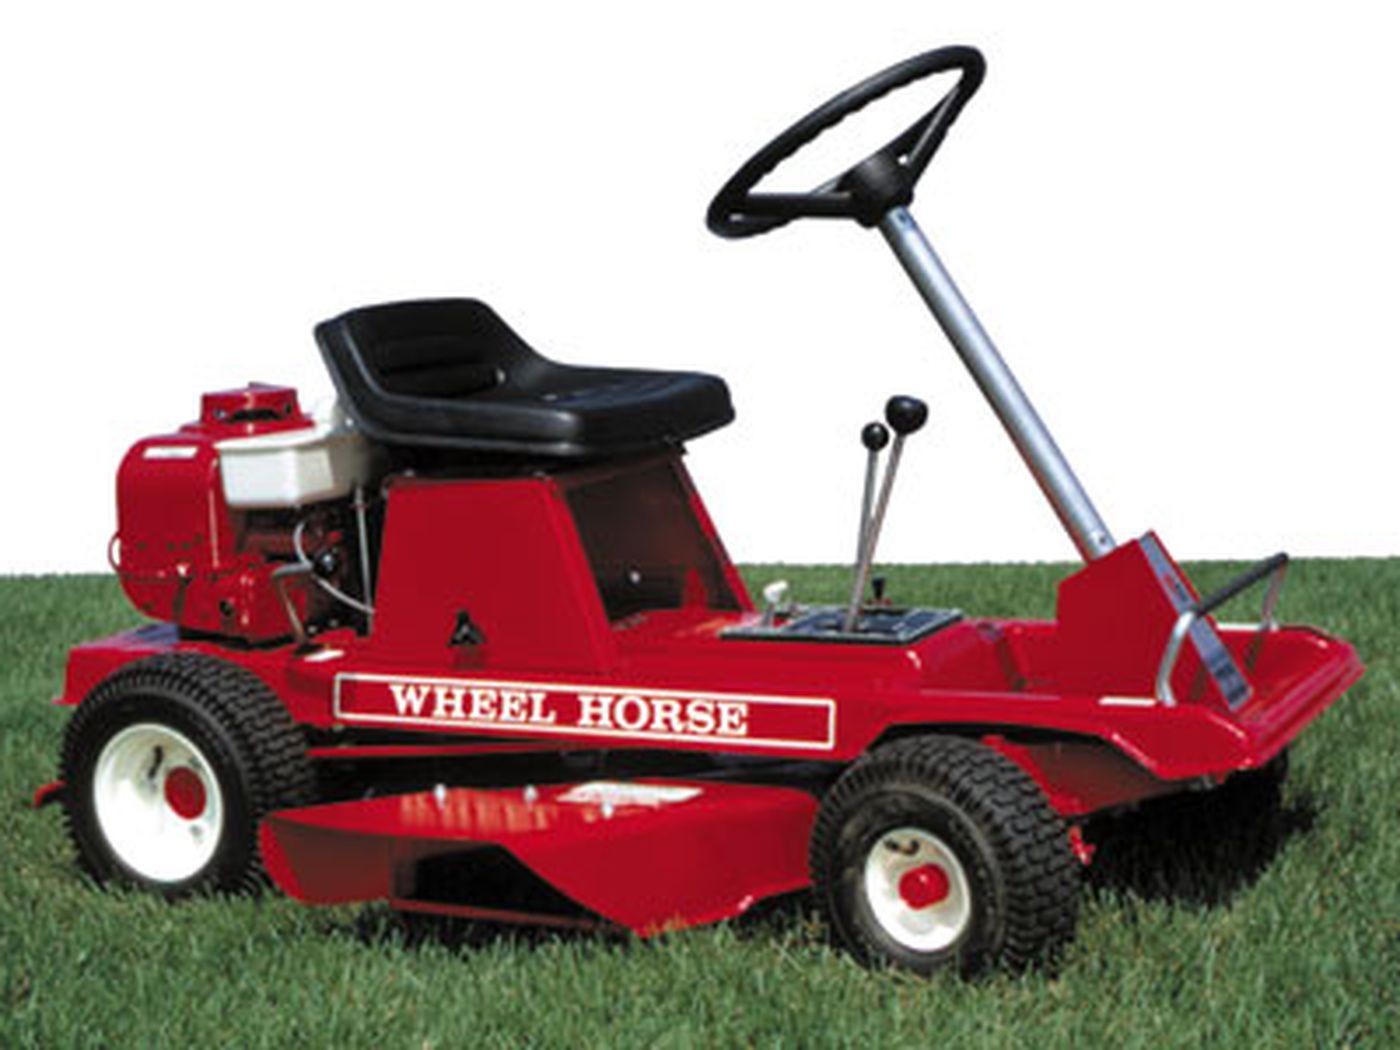 Years of Innovation: Lawn Tractors .thisoldhouse.com